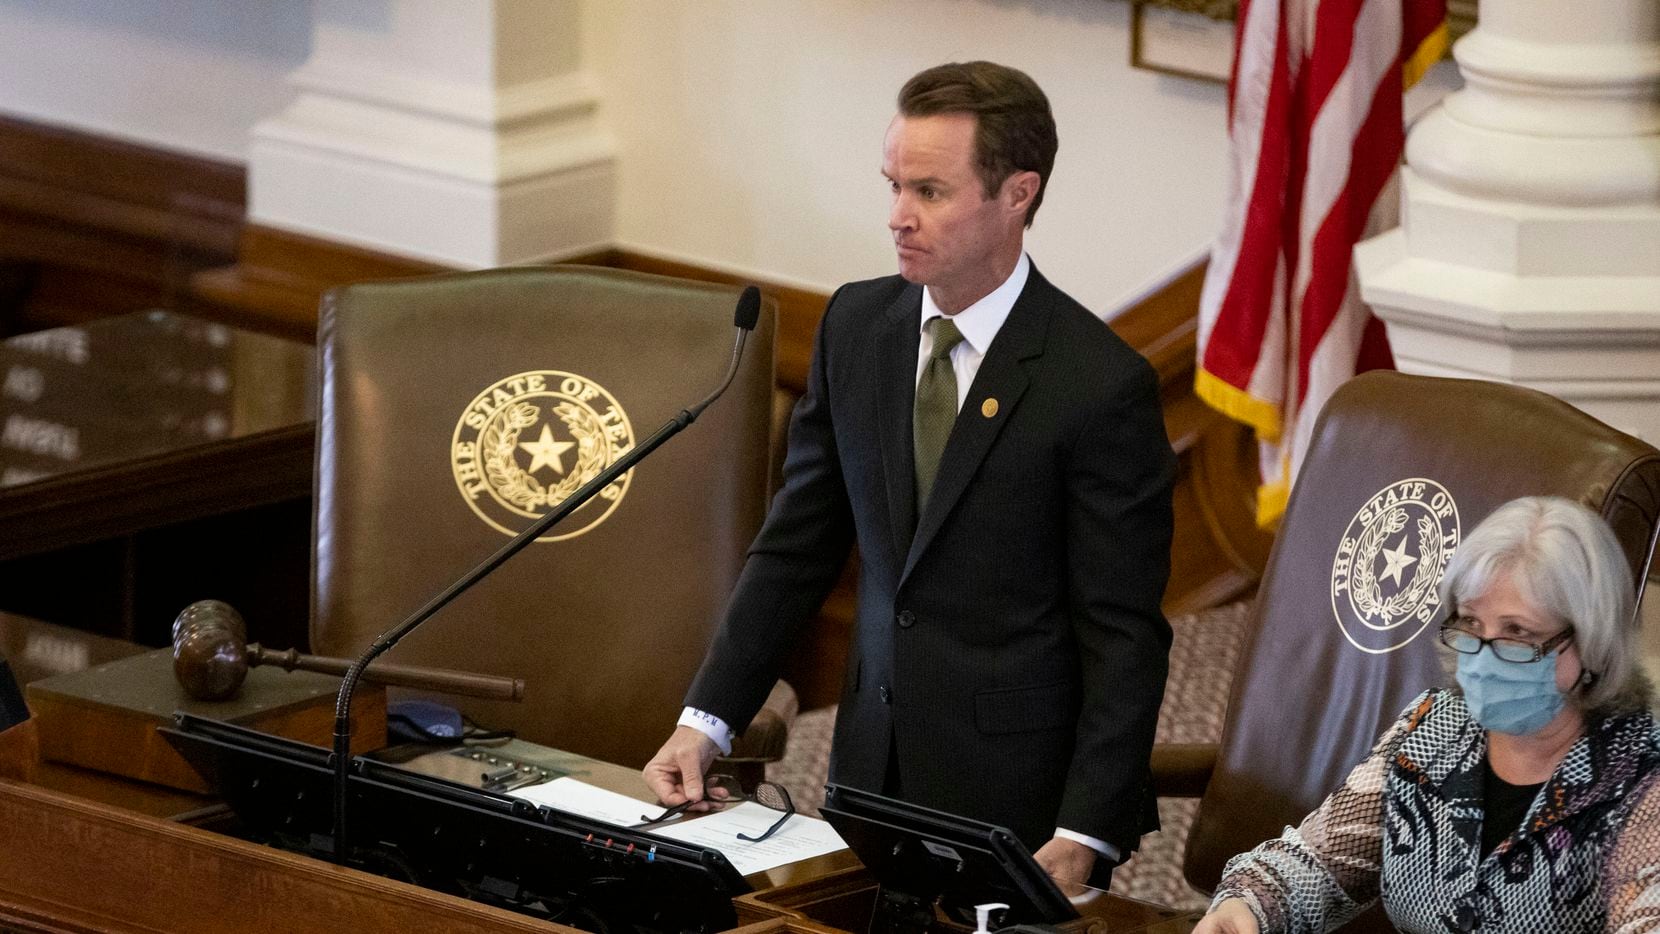 House Speaker Dade Phelan stands at the dais in the House chamber of the Texas Capitol in Austin on March 17, 2021.